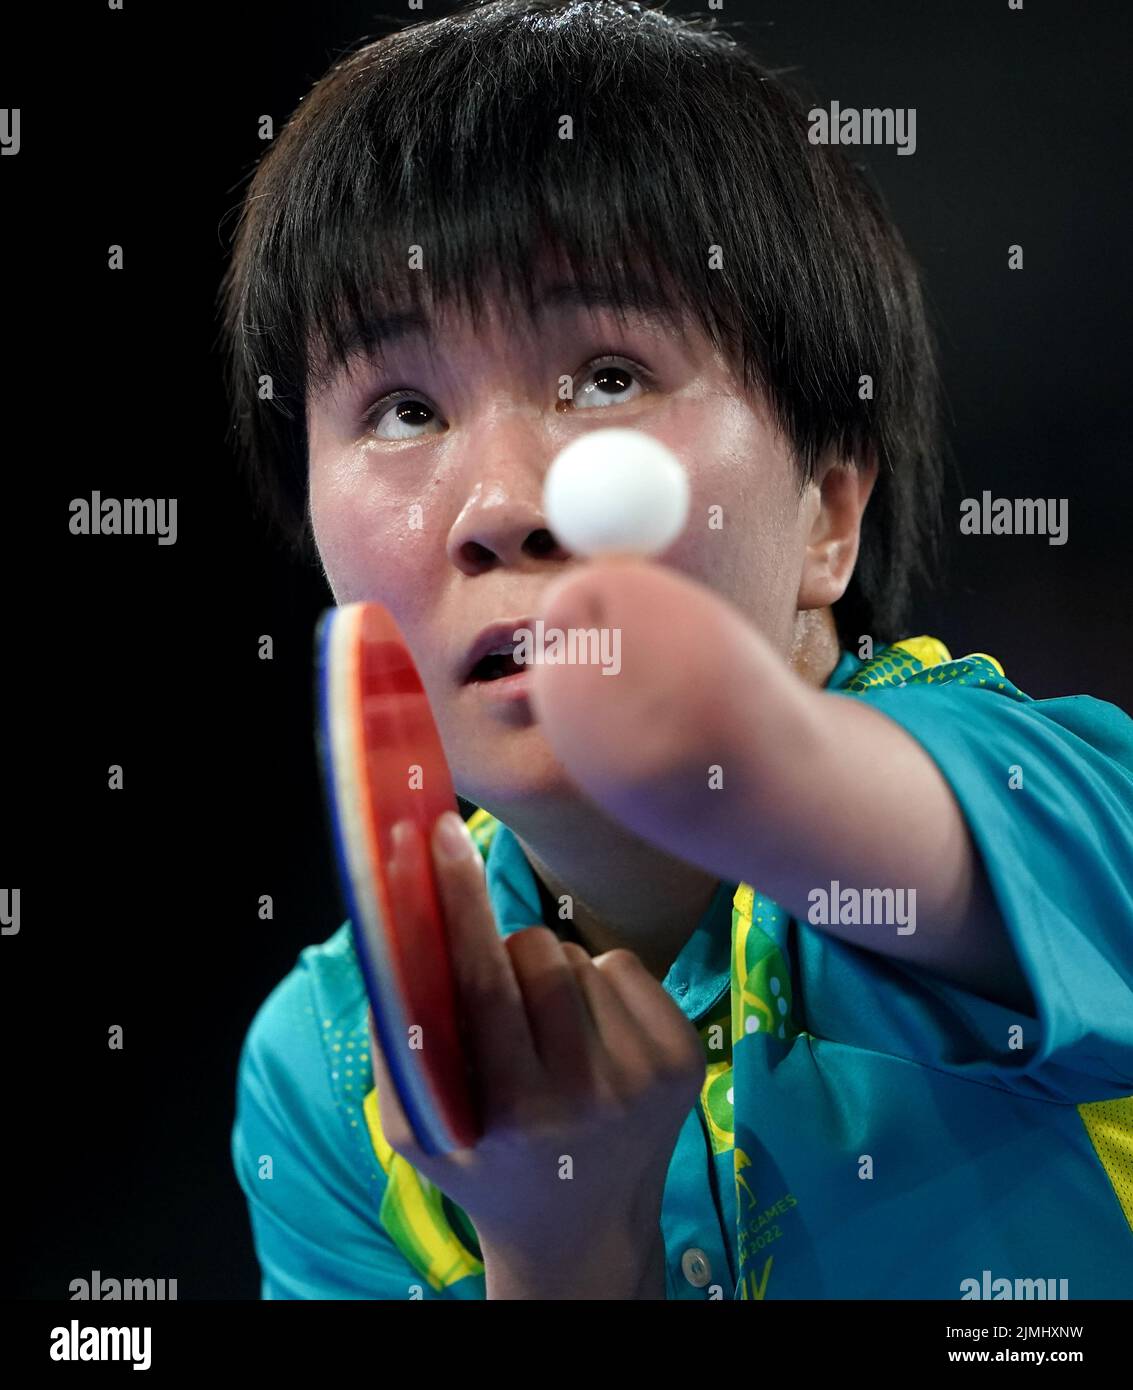 Australia's Qian Yang serves against Australia's Li Na Lei during the Table Tennis Women's Singles Classes 6-10 - Gold Medal Matchat The NEC on day nine of the 2022 Commonwealth Games in Birmingham. Picture date: Saturday August 6, 2022. Stock Photo